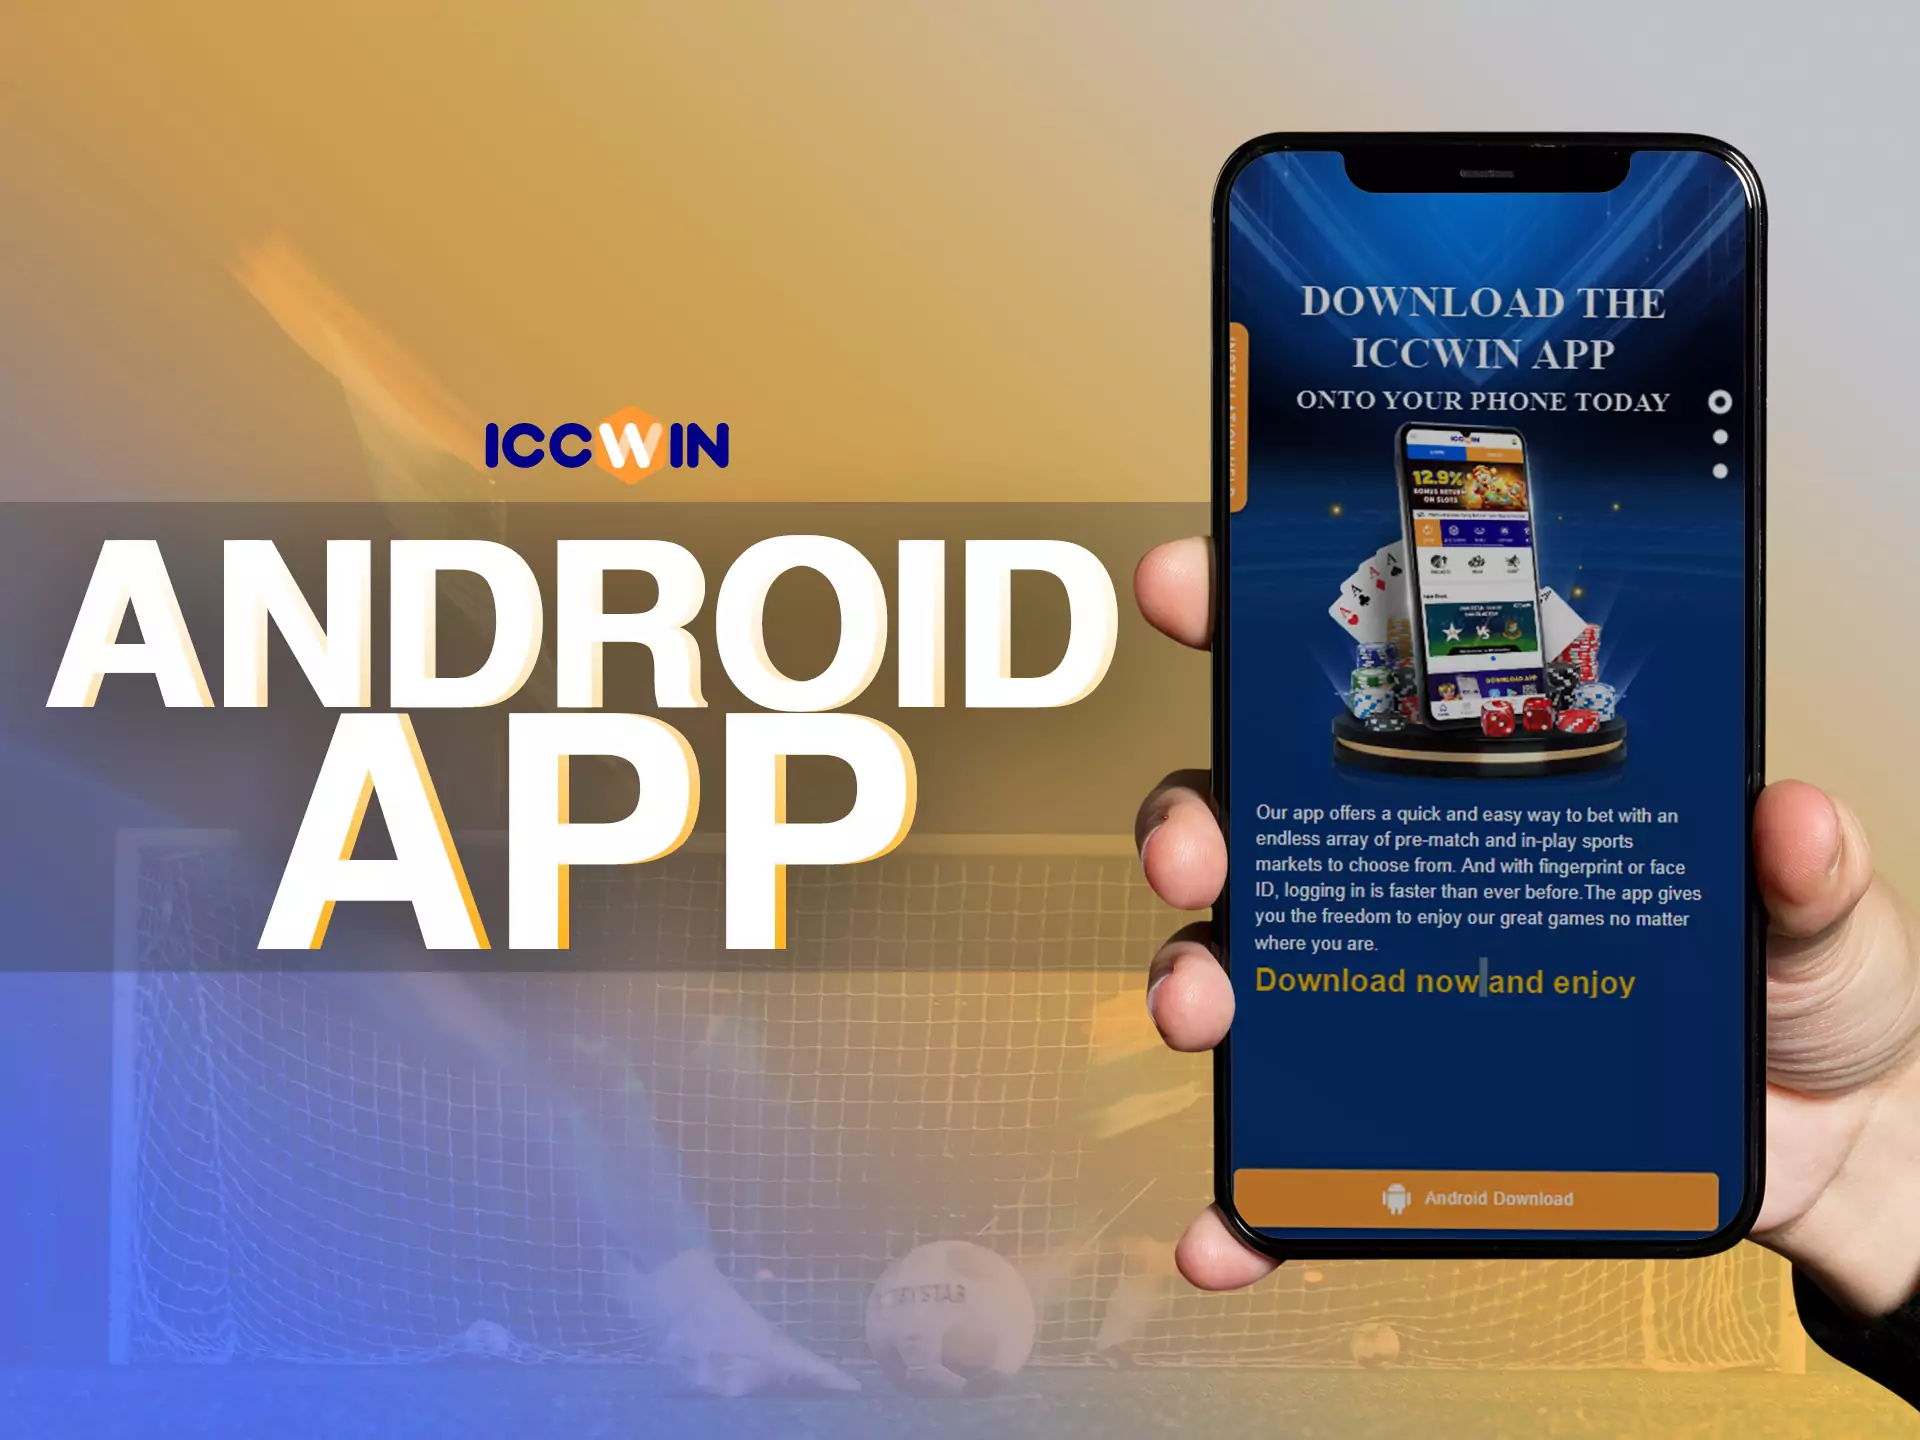 For Android devices, install the ICCWin mobile app.